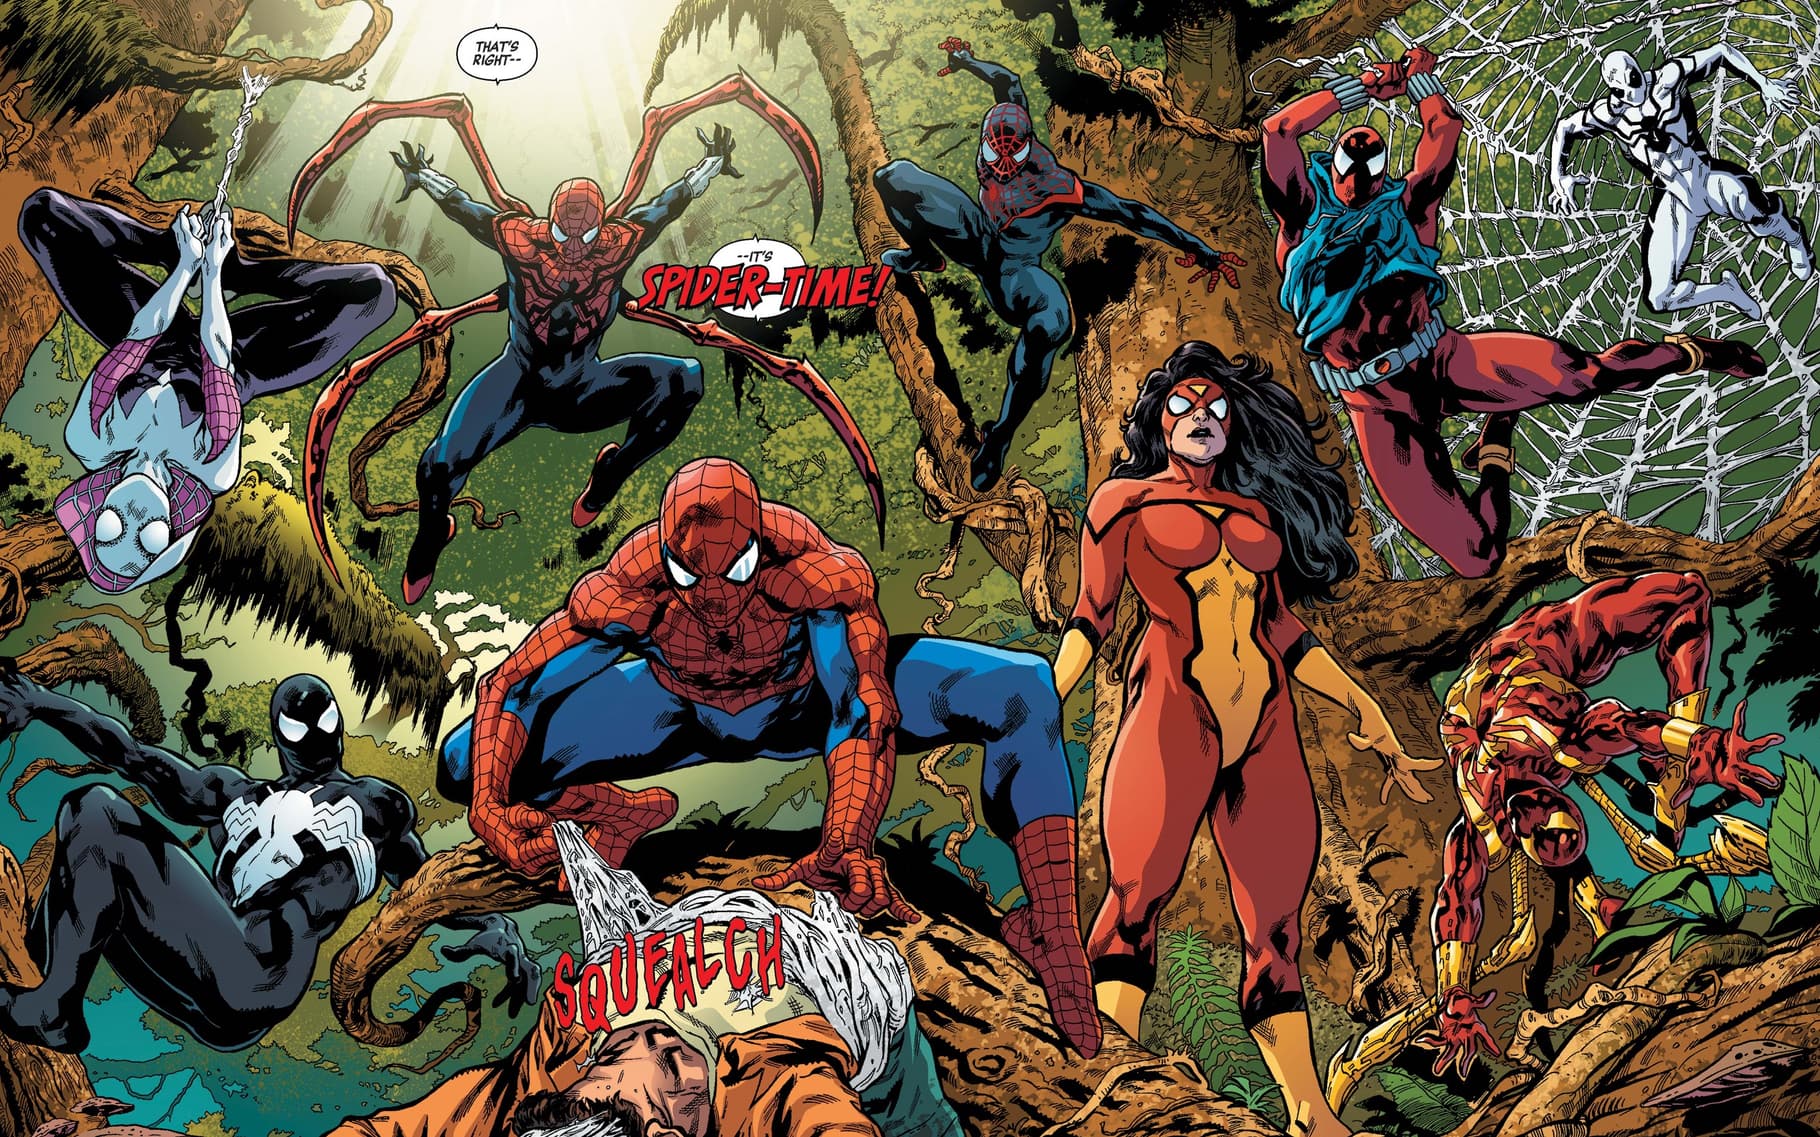 Preview from MURDERWORLD: SPIDER-MAN (2023) #1 with art by Farid Karami and Chris Sotomayor.